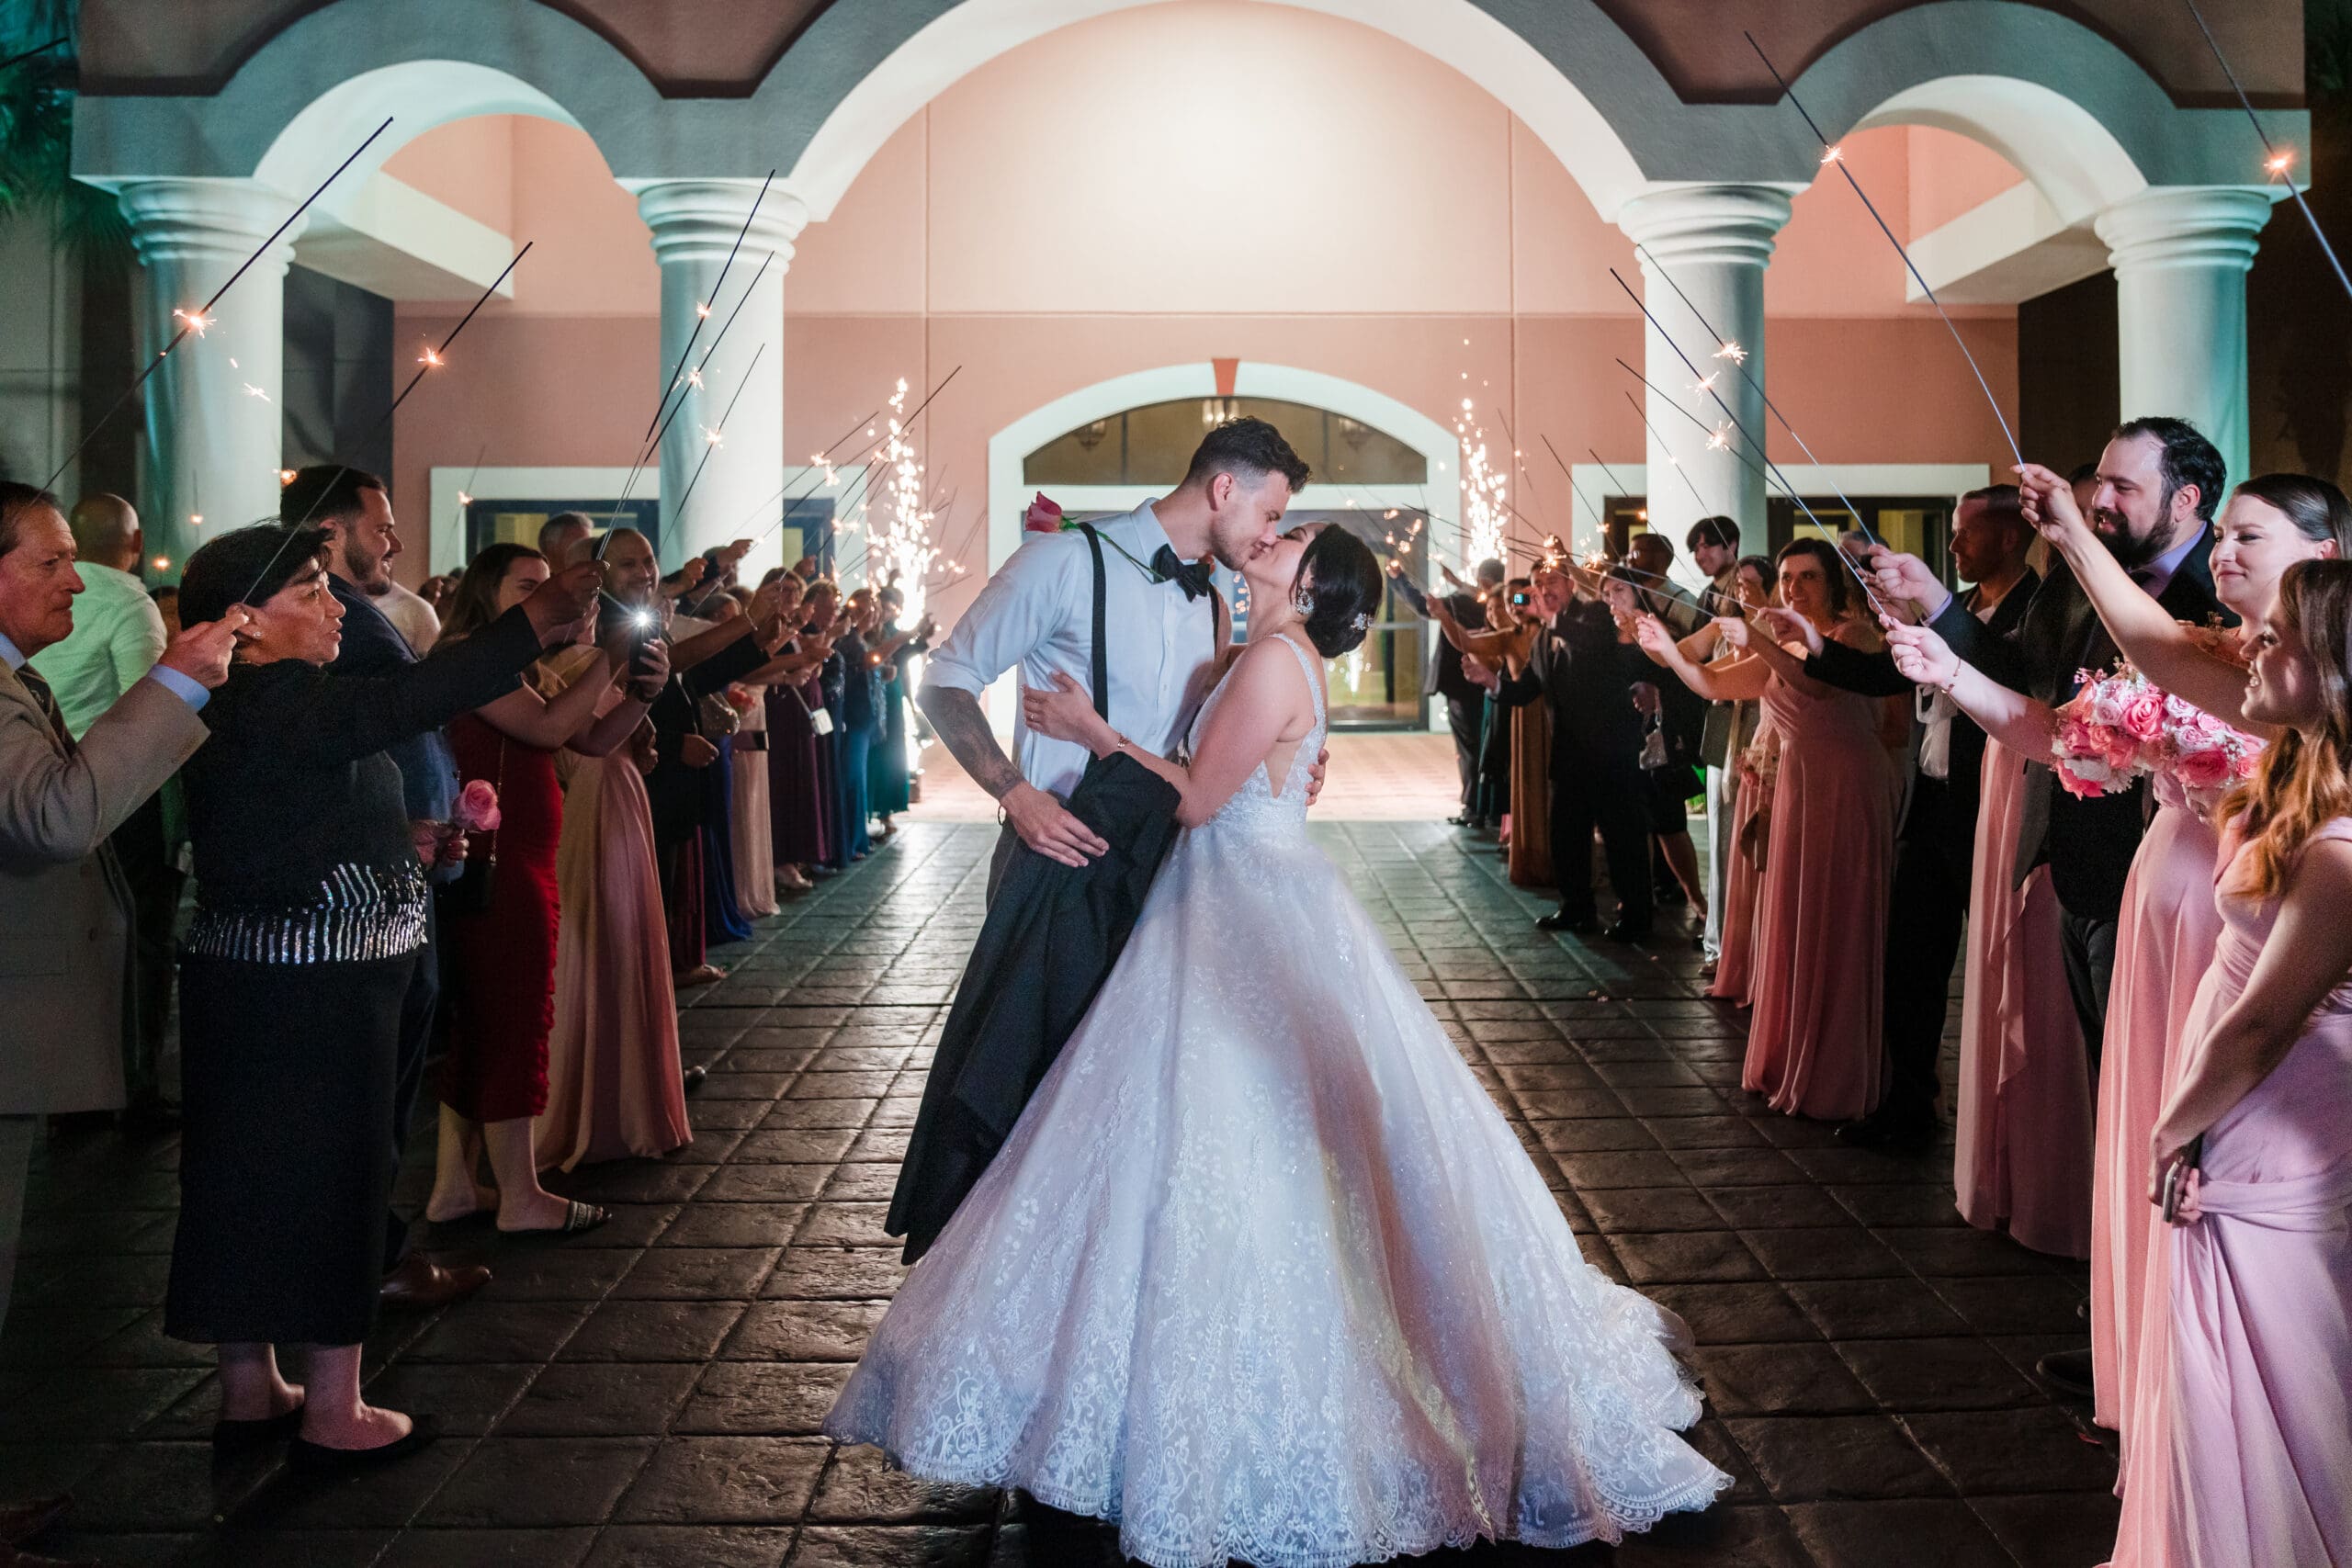 Wide shot capturing Jessica and Javier's kiss at the end of the grand exit, with guests raising their arms and holding extra-large sparklers, creating a luminous display of celebration.